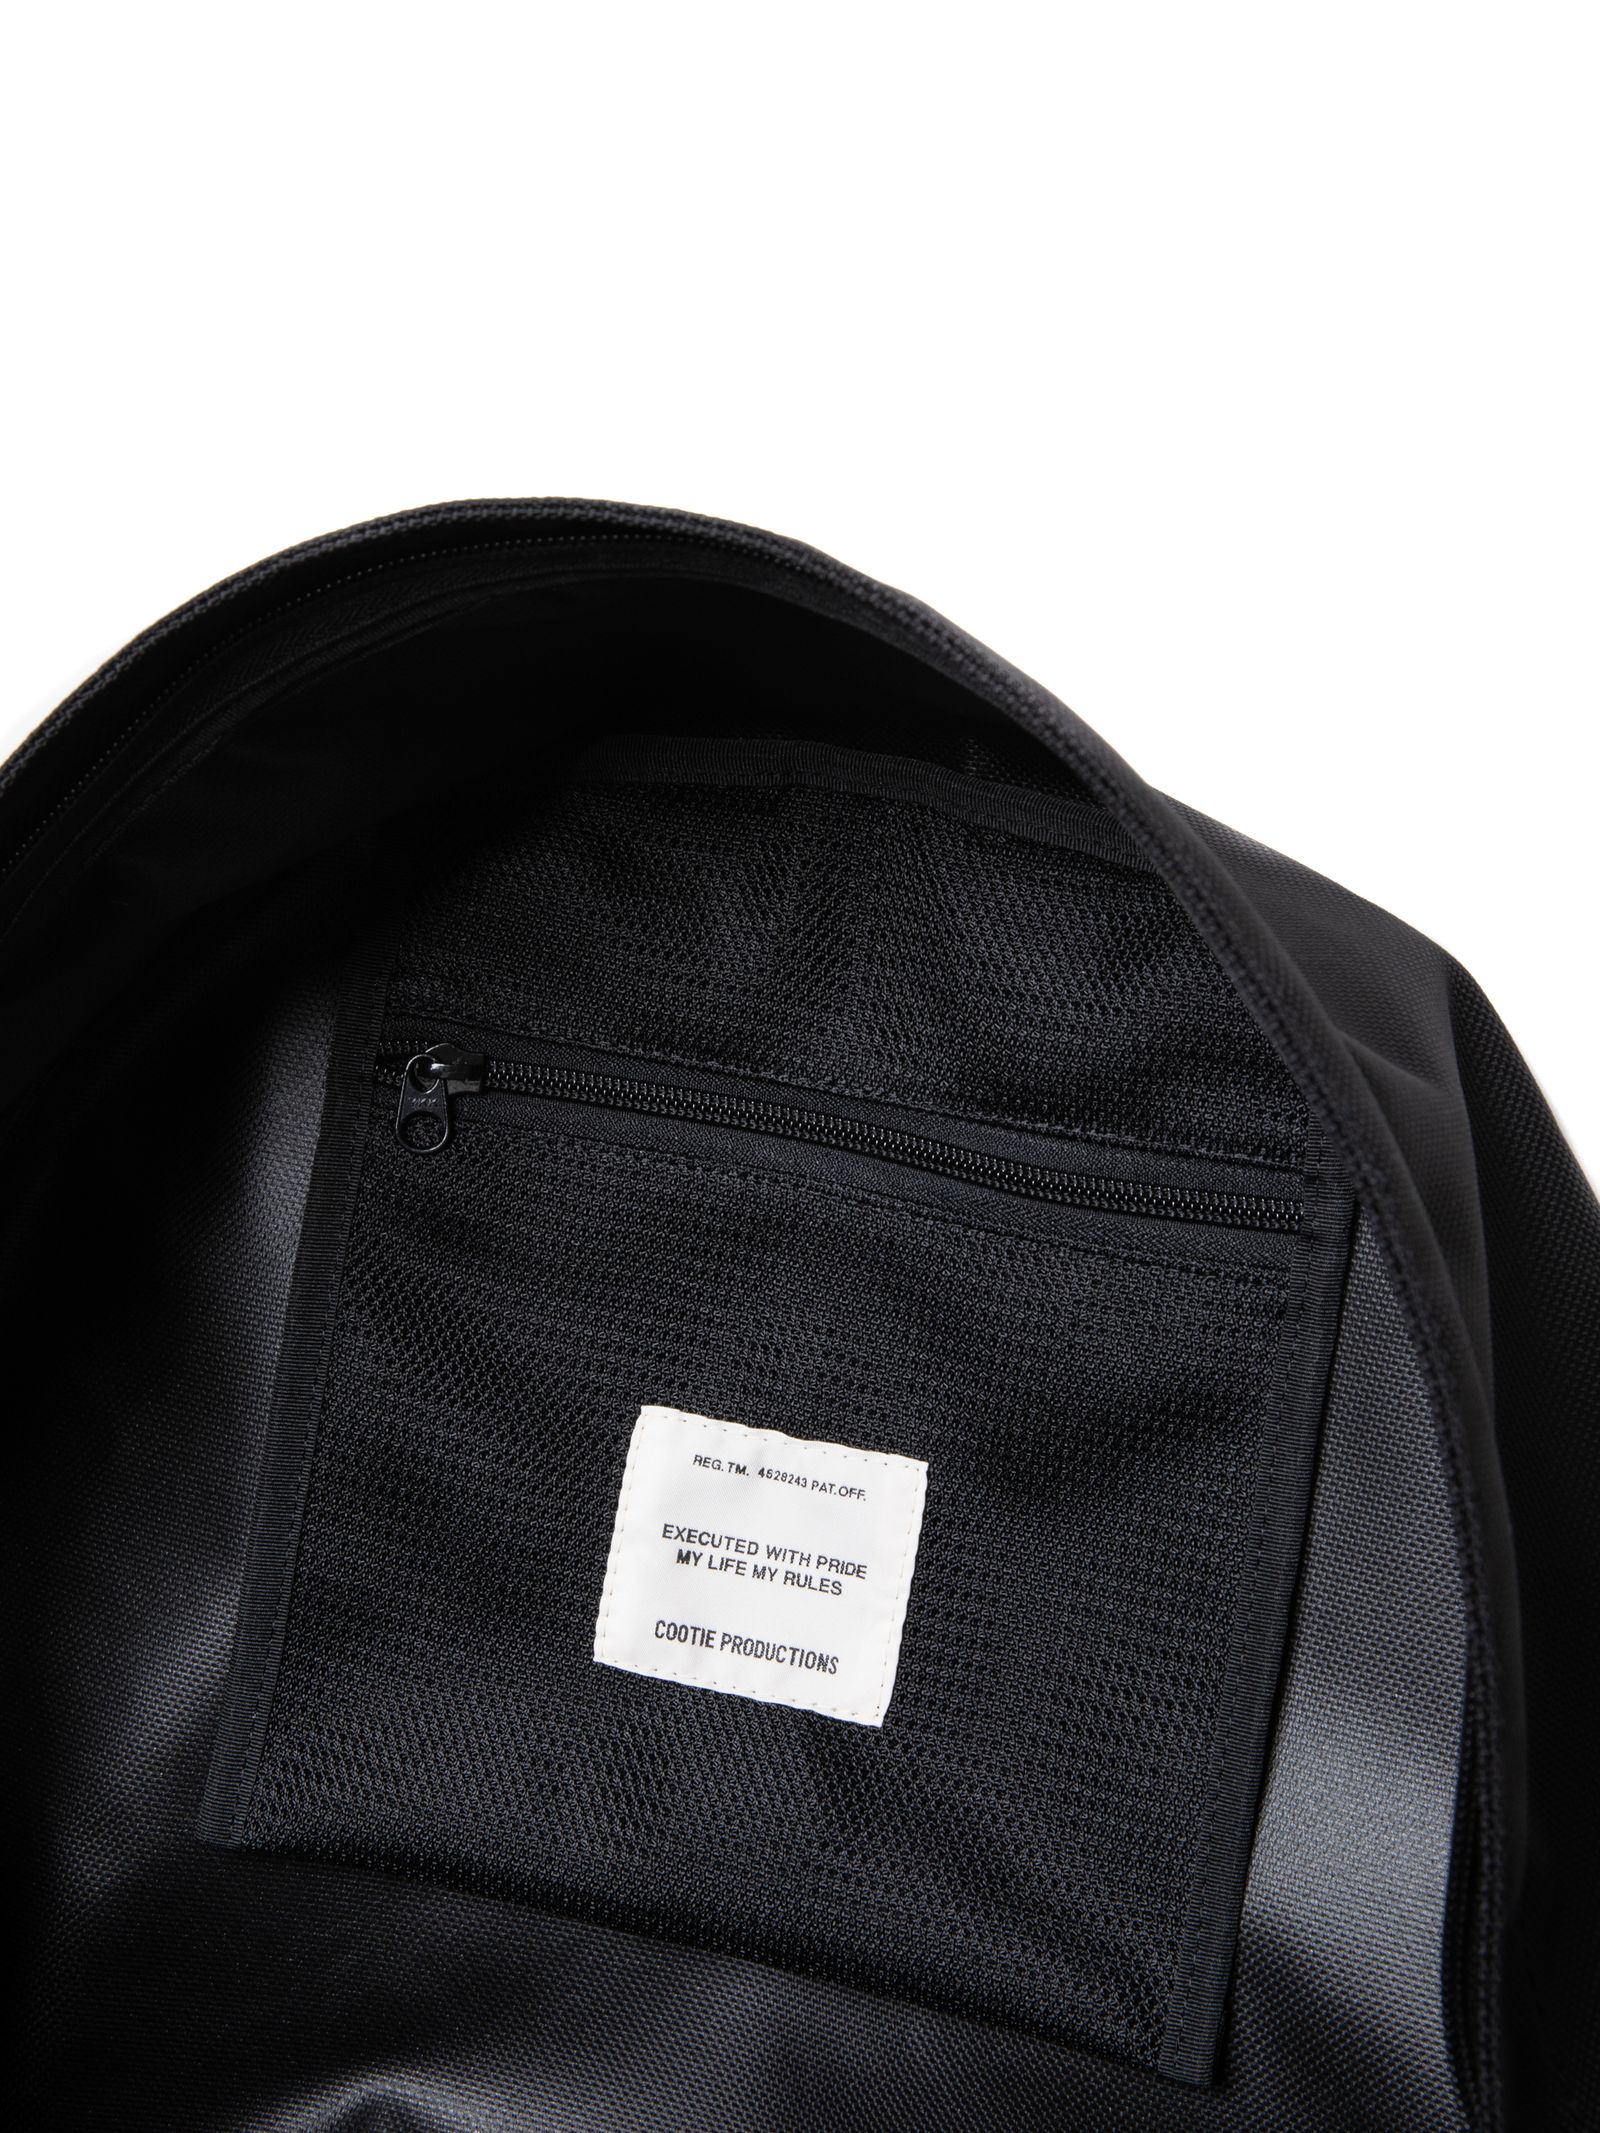 COOTIE PRODUCTIONS - STANDARD DAY PACK (BLACK ...